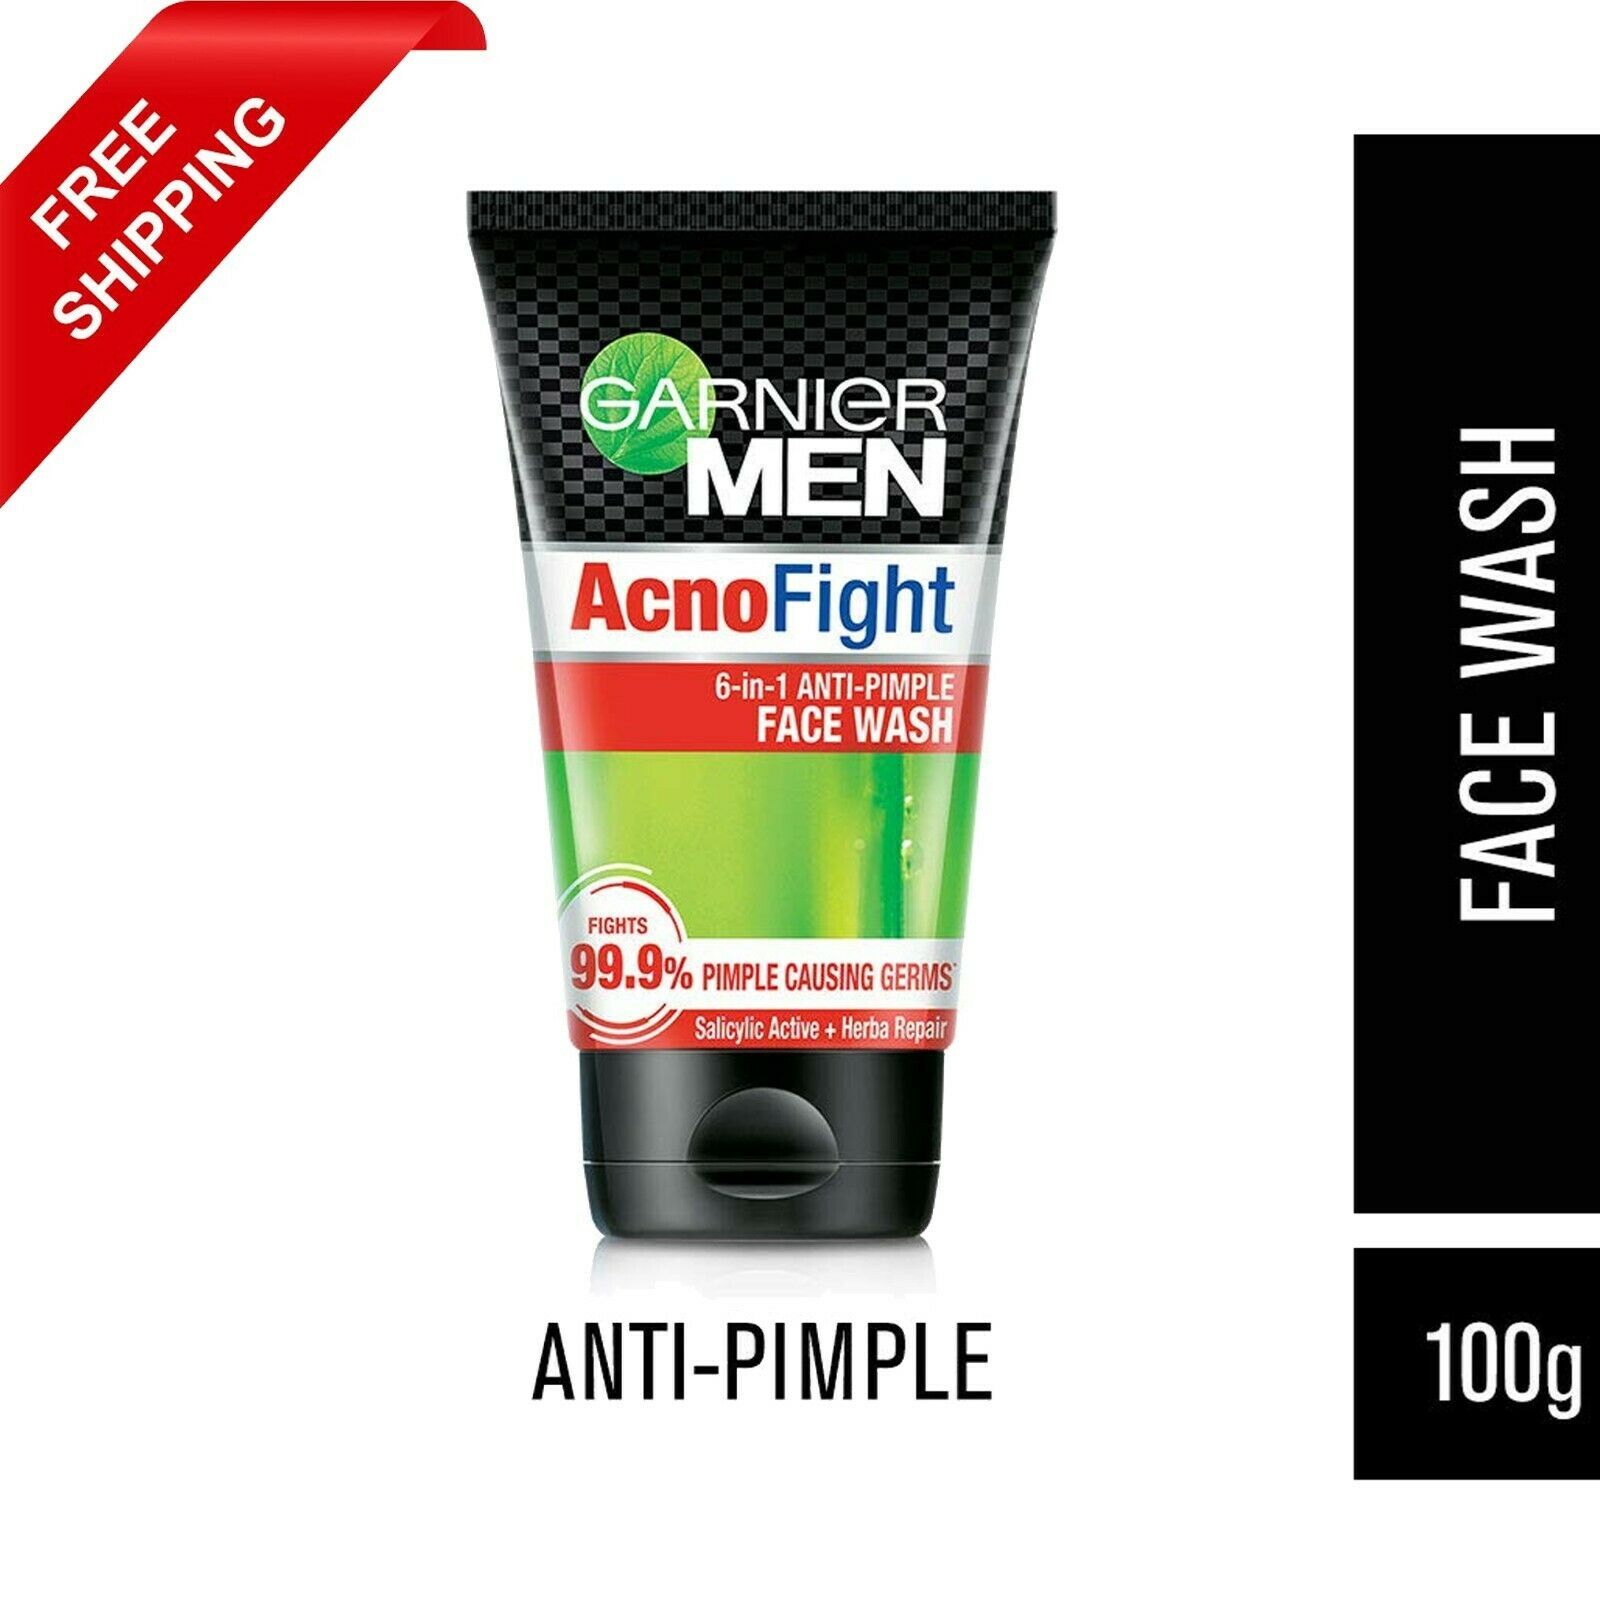 Garnier Men AcnoFight Anti Pimple Face Wash,Fight With Pimple Causing Germs 100g - $17.91 - $27.05